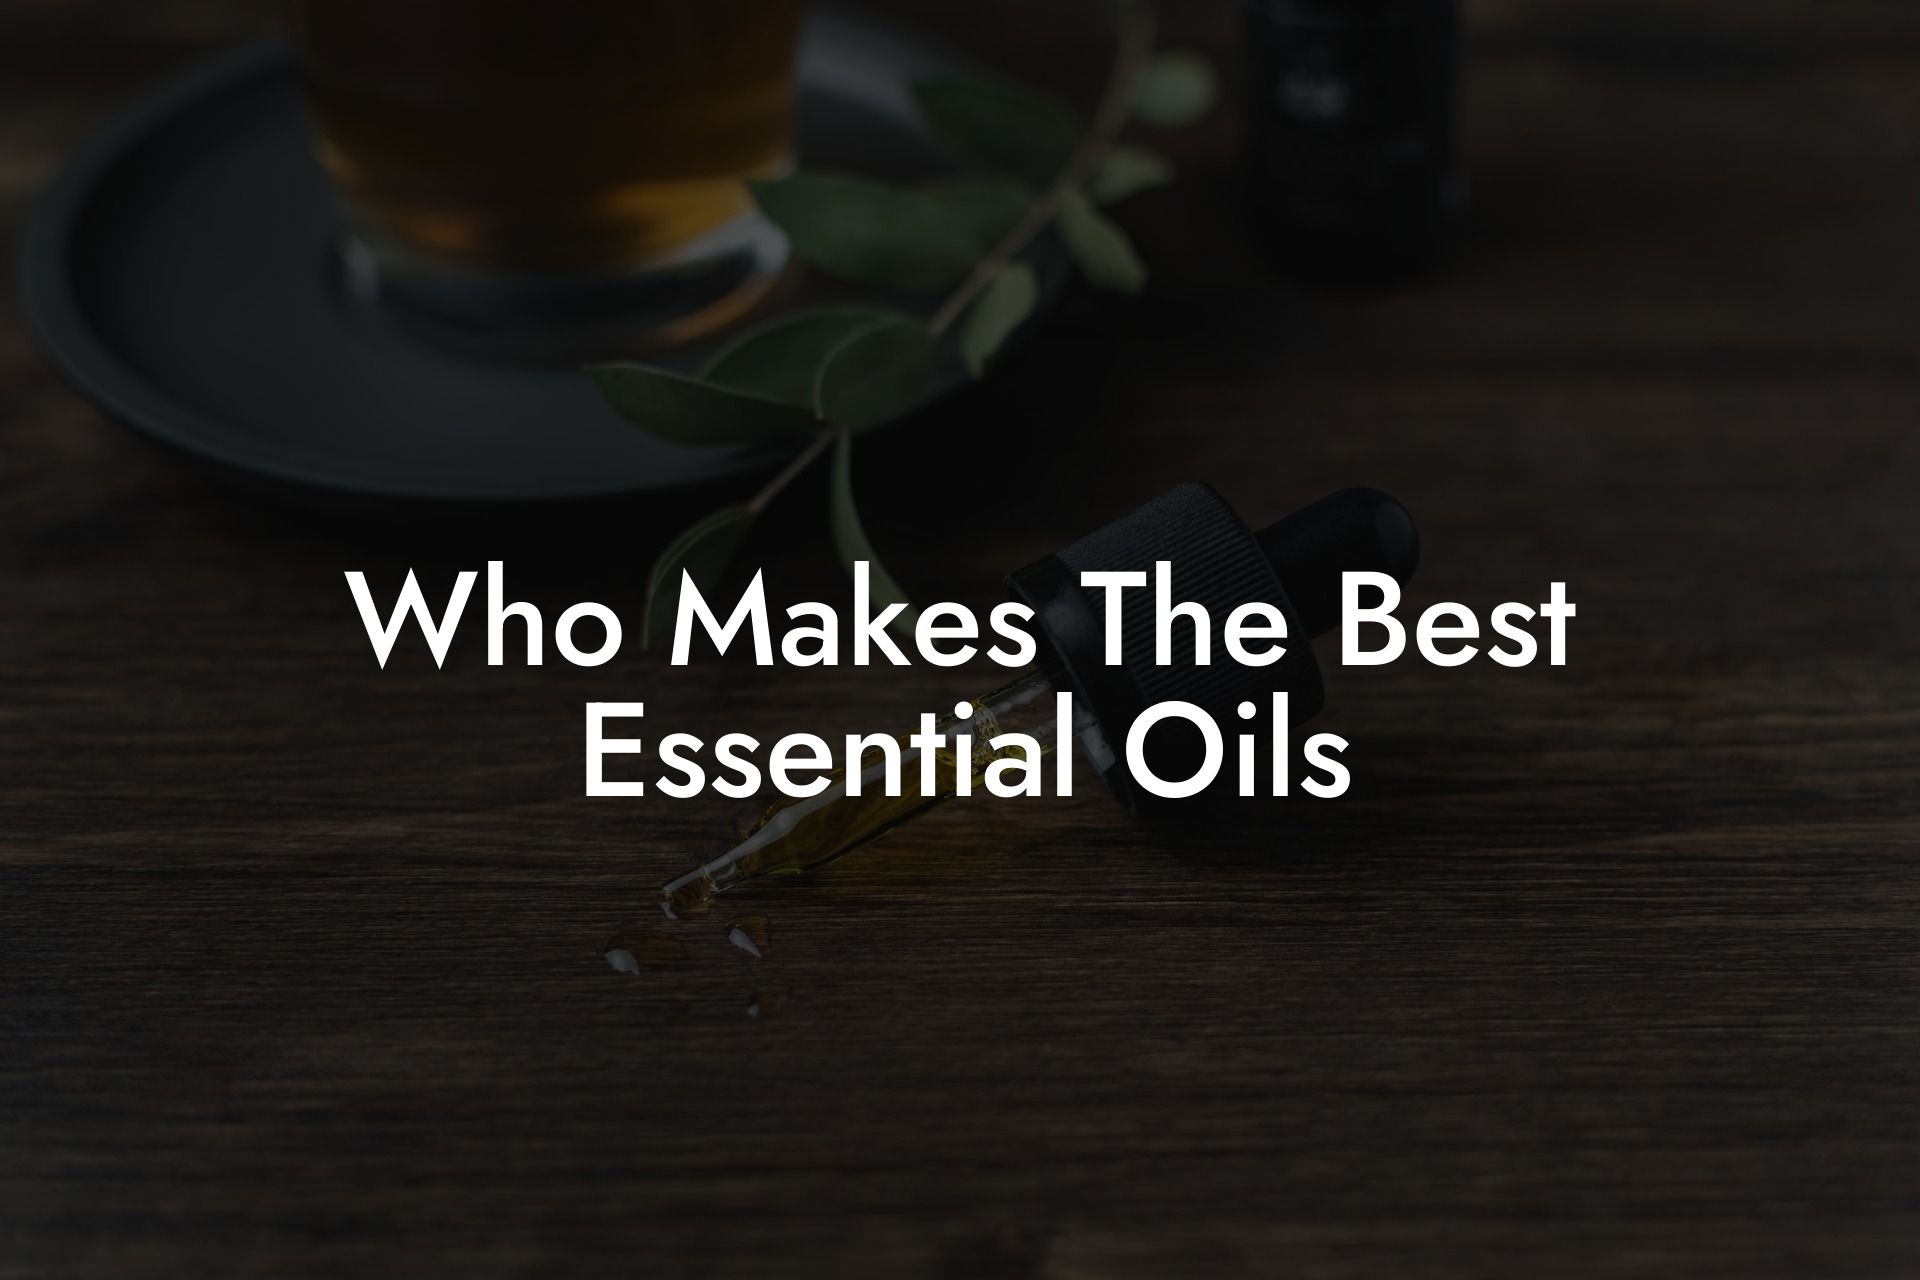 Who Makes The Best Essential Oils